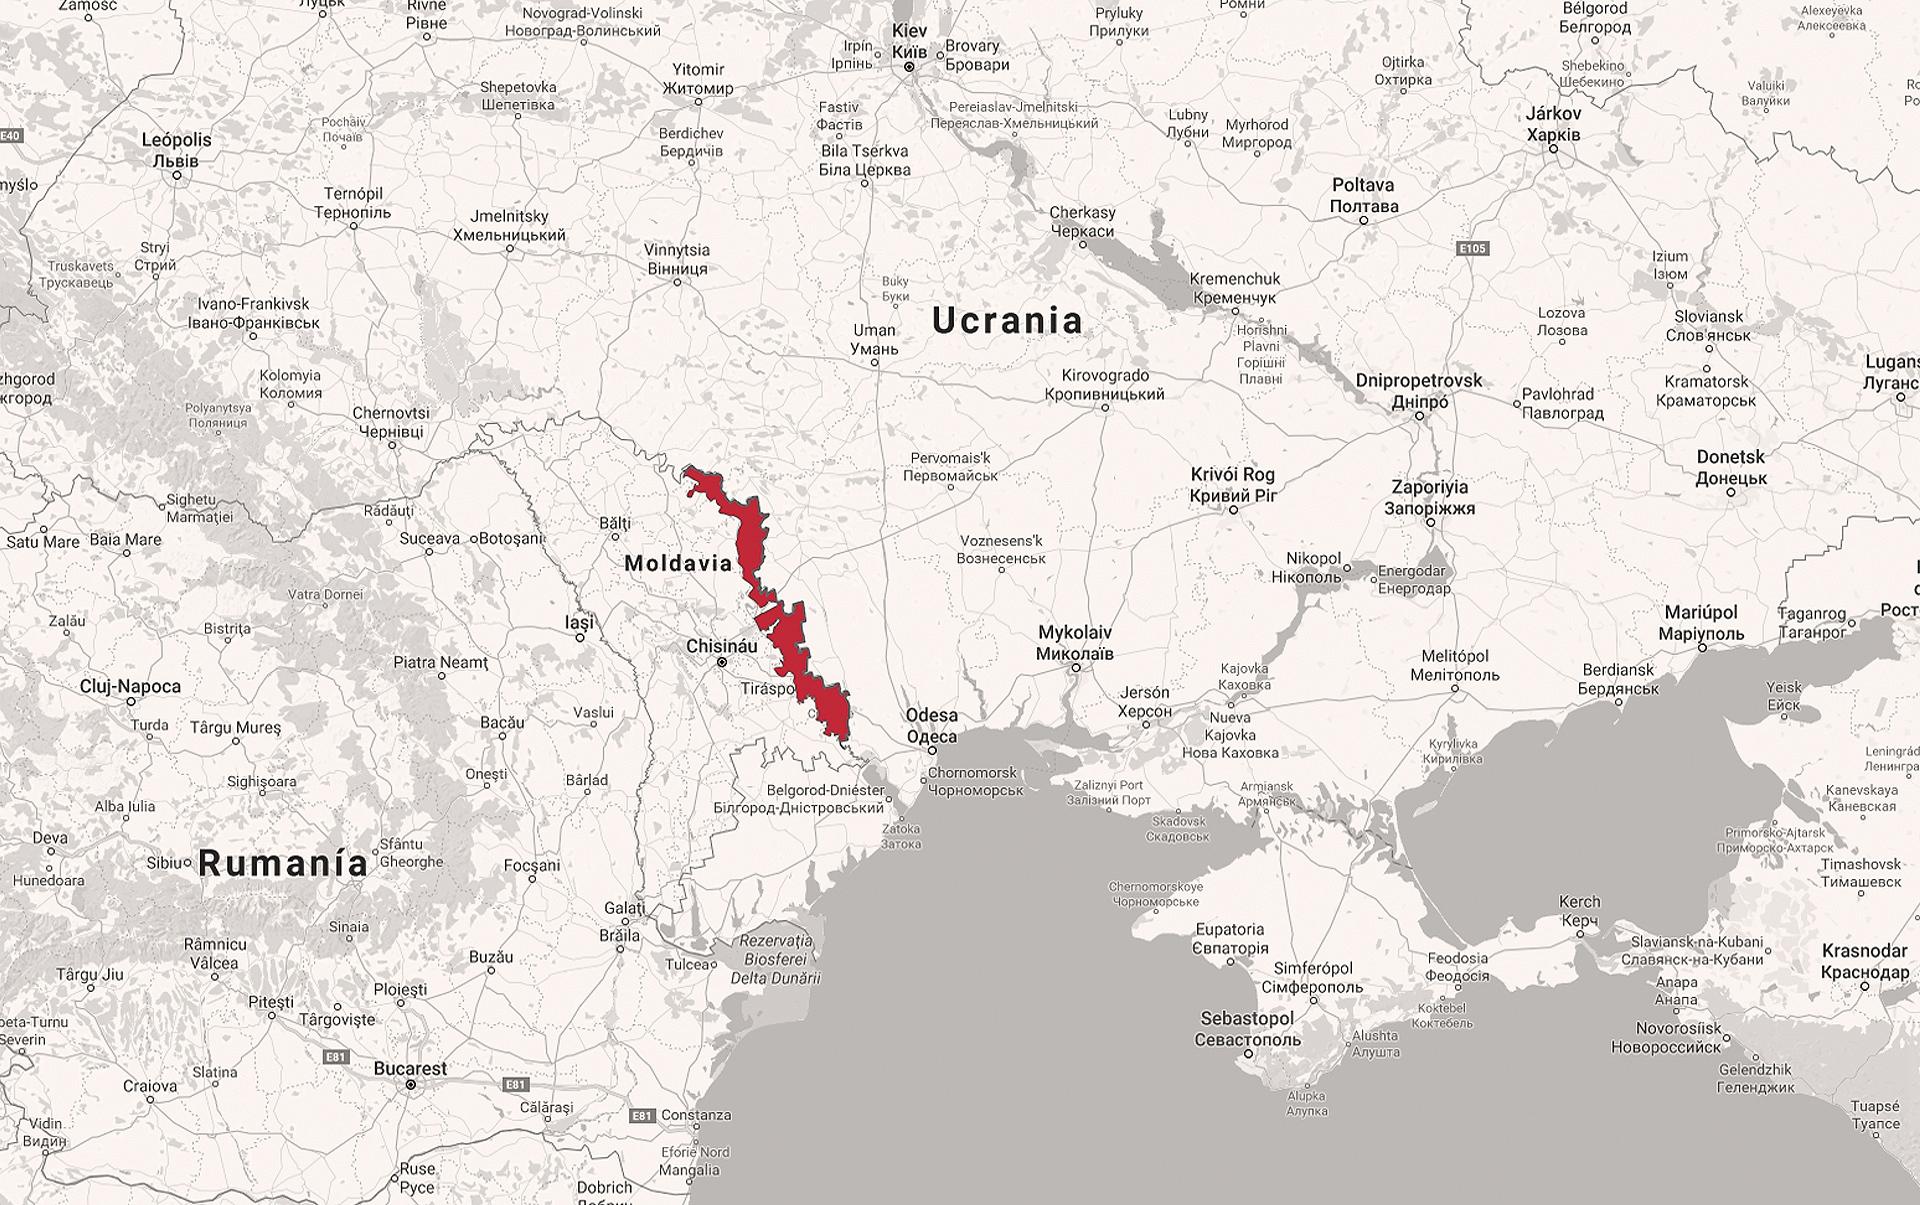 OFF THE MAP - TRANSNISTRIA